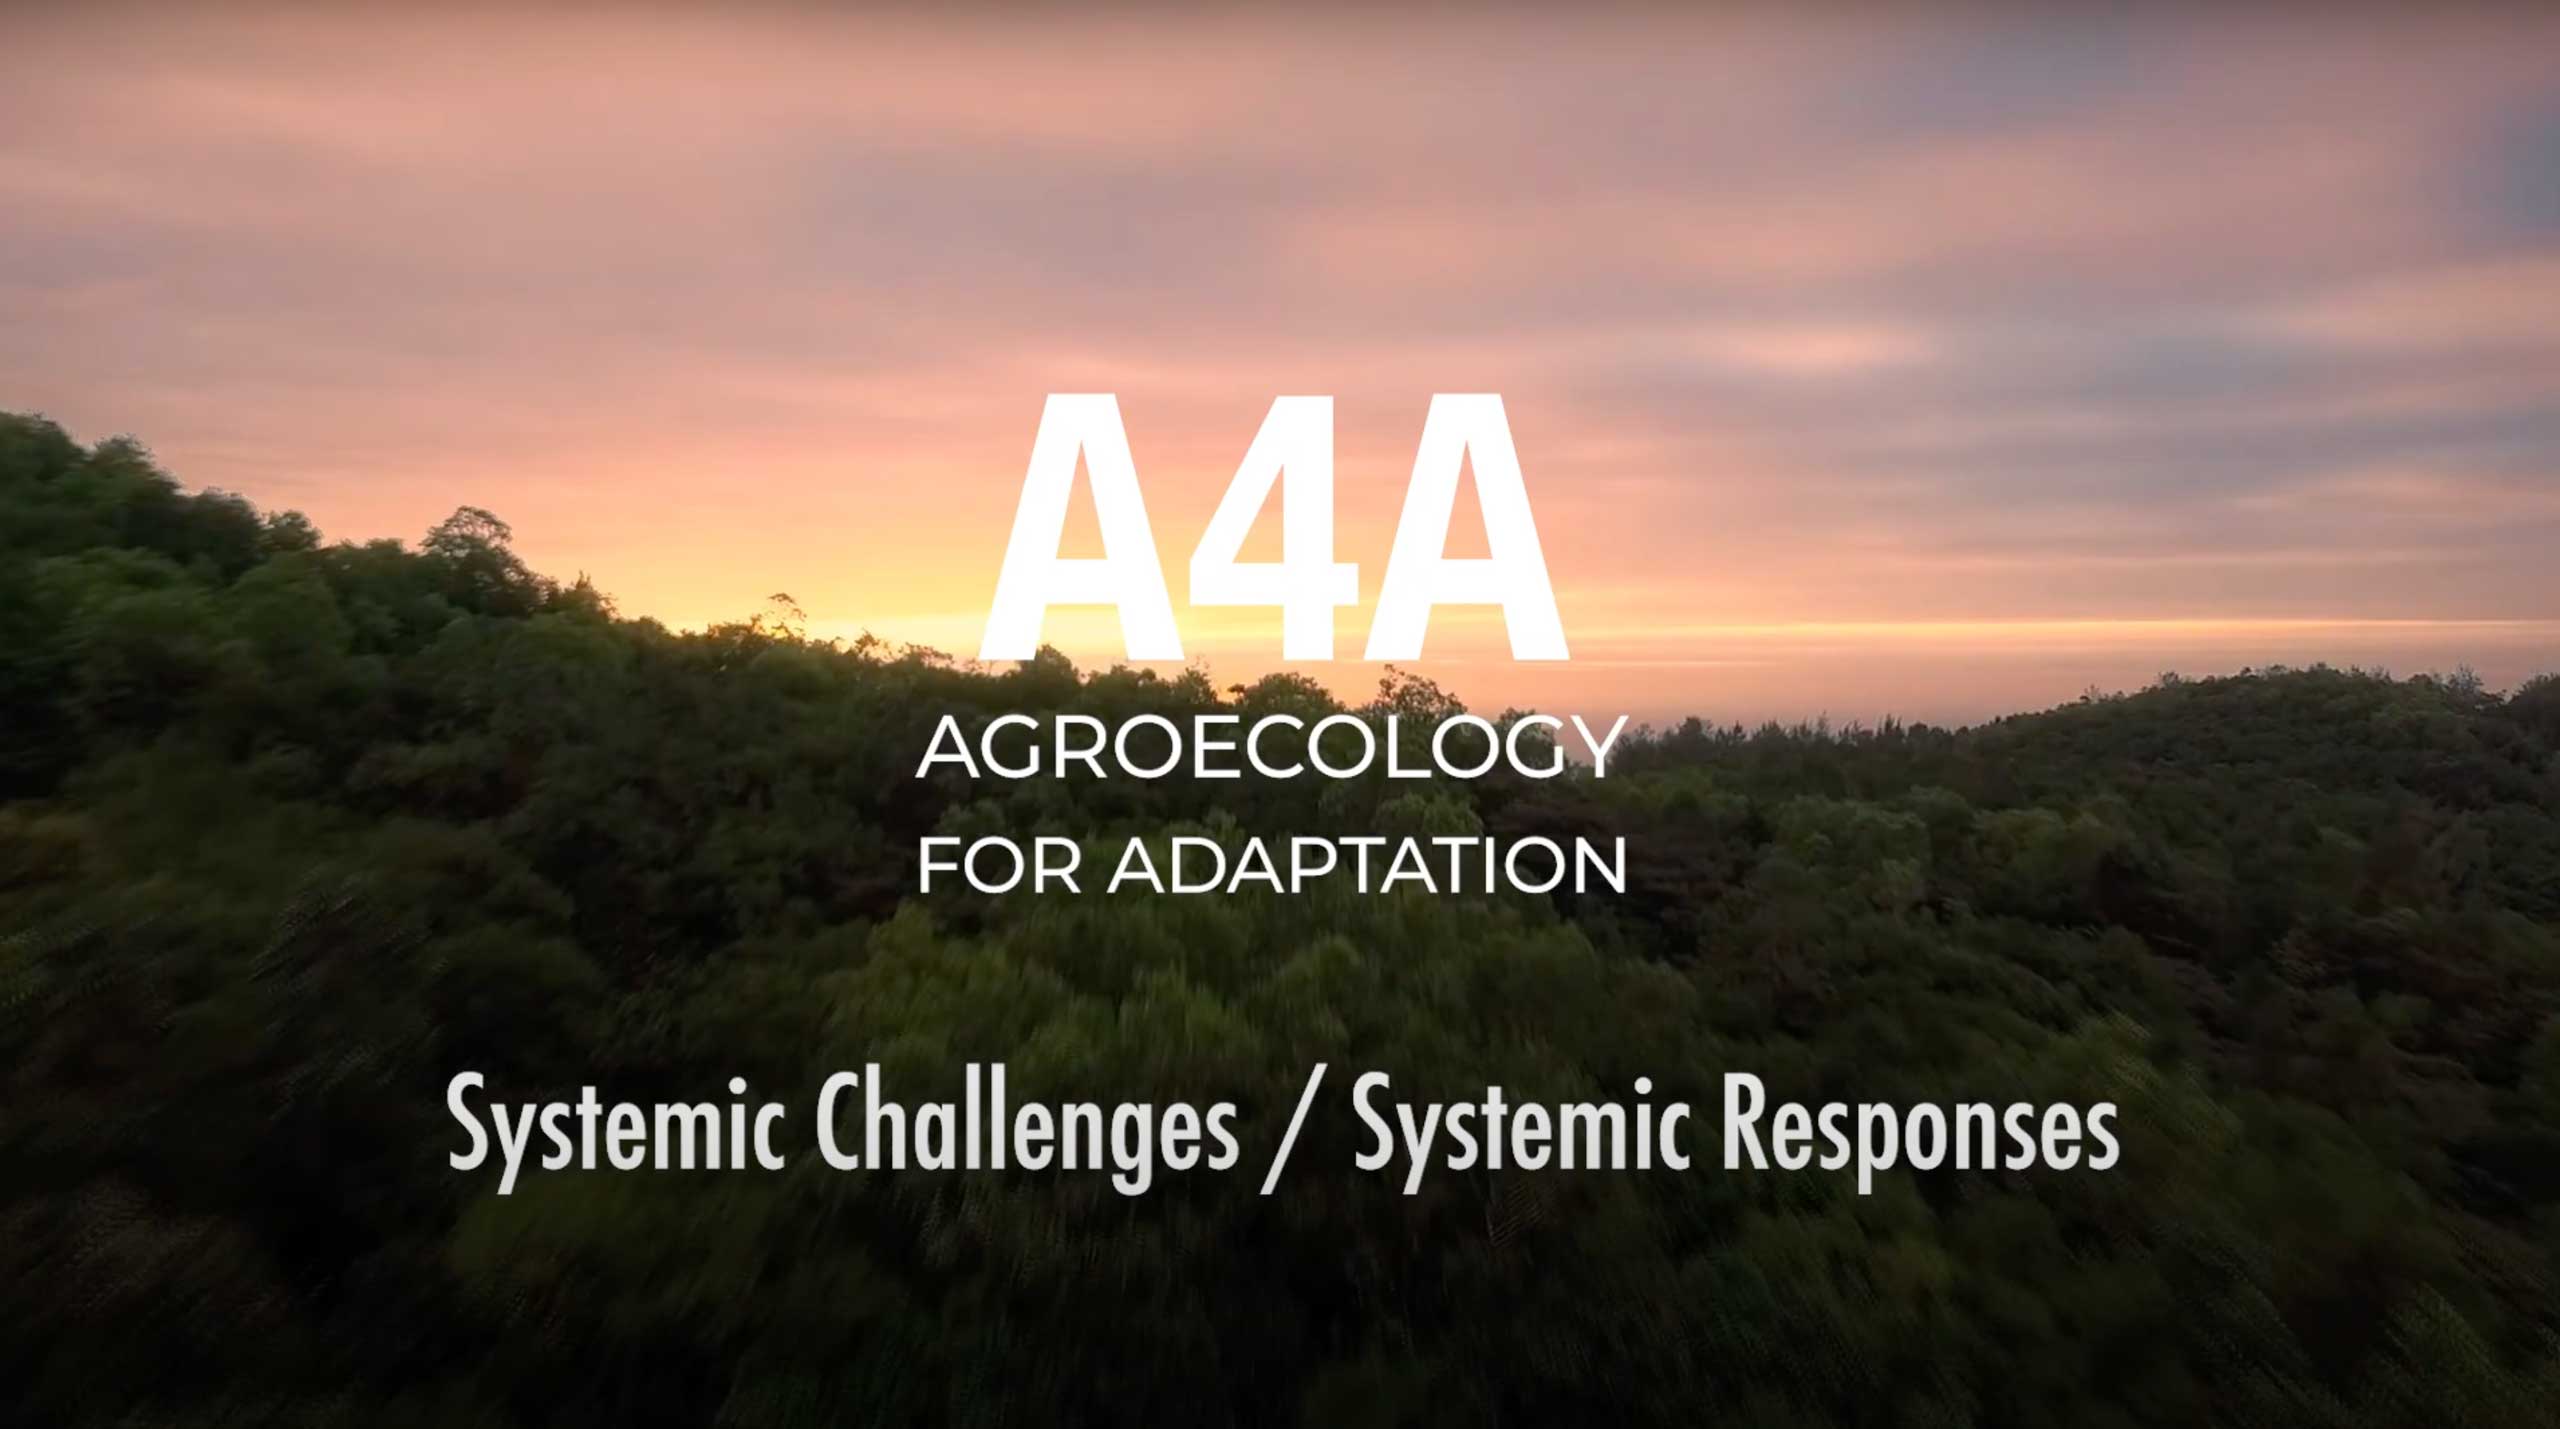 Agroecology for Adaptation - Systemic Challenges/Systemic Responses